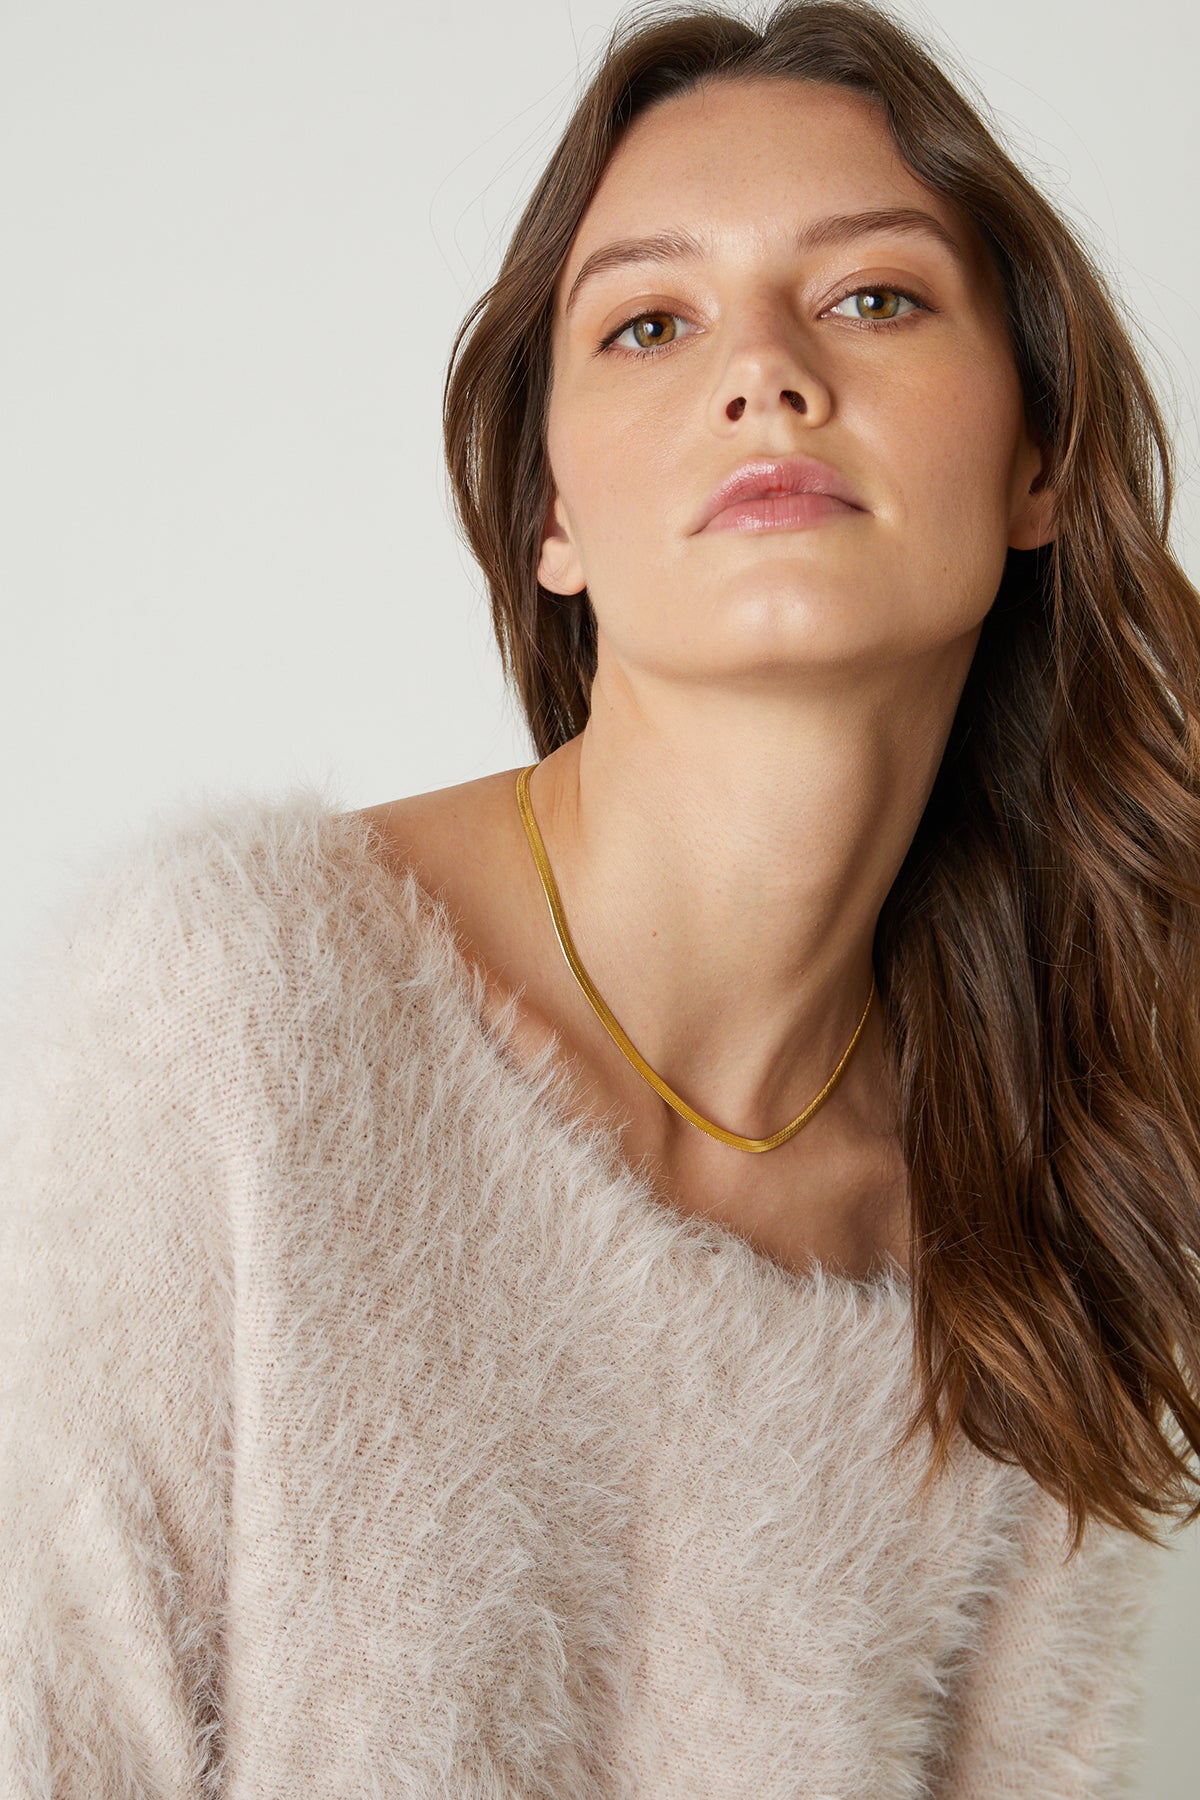   Betty Feather Yarn Boat Neck Sweater in pale blush pink front detail with gold necklace 